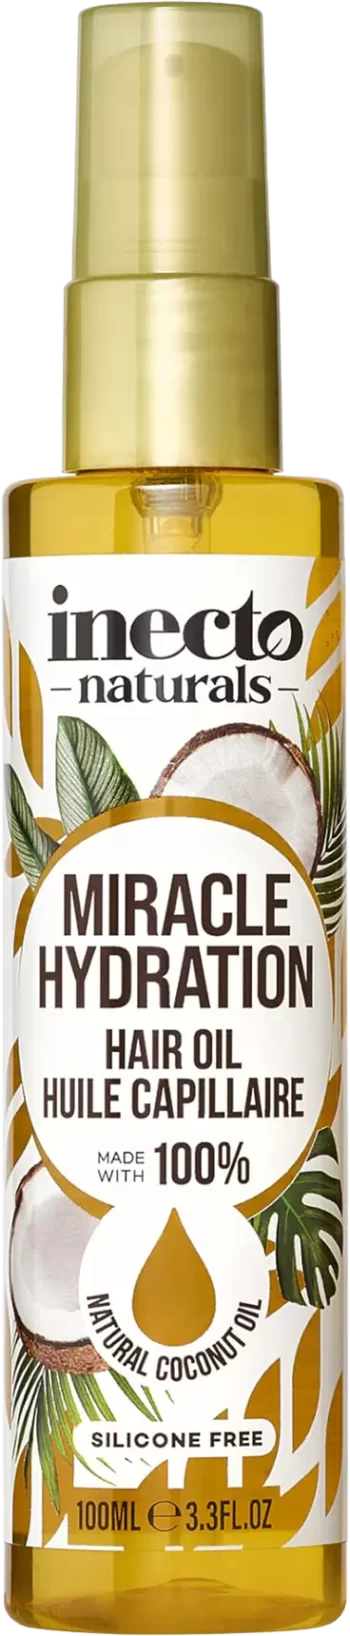 inecto miracle hydration coconut hair oil 100ml